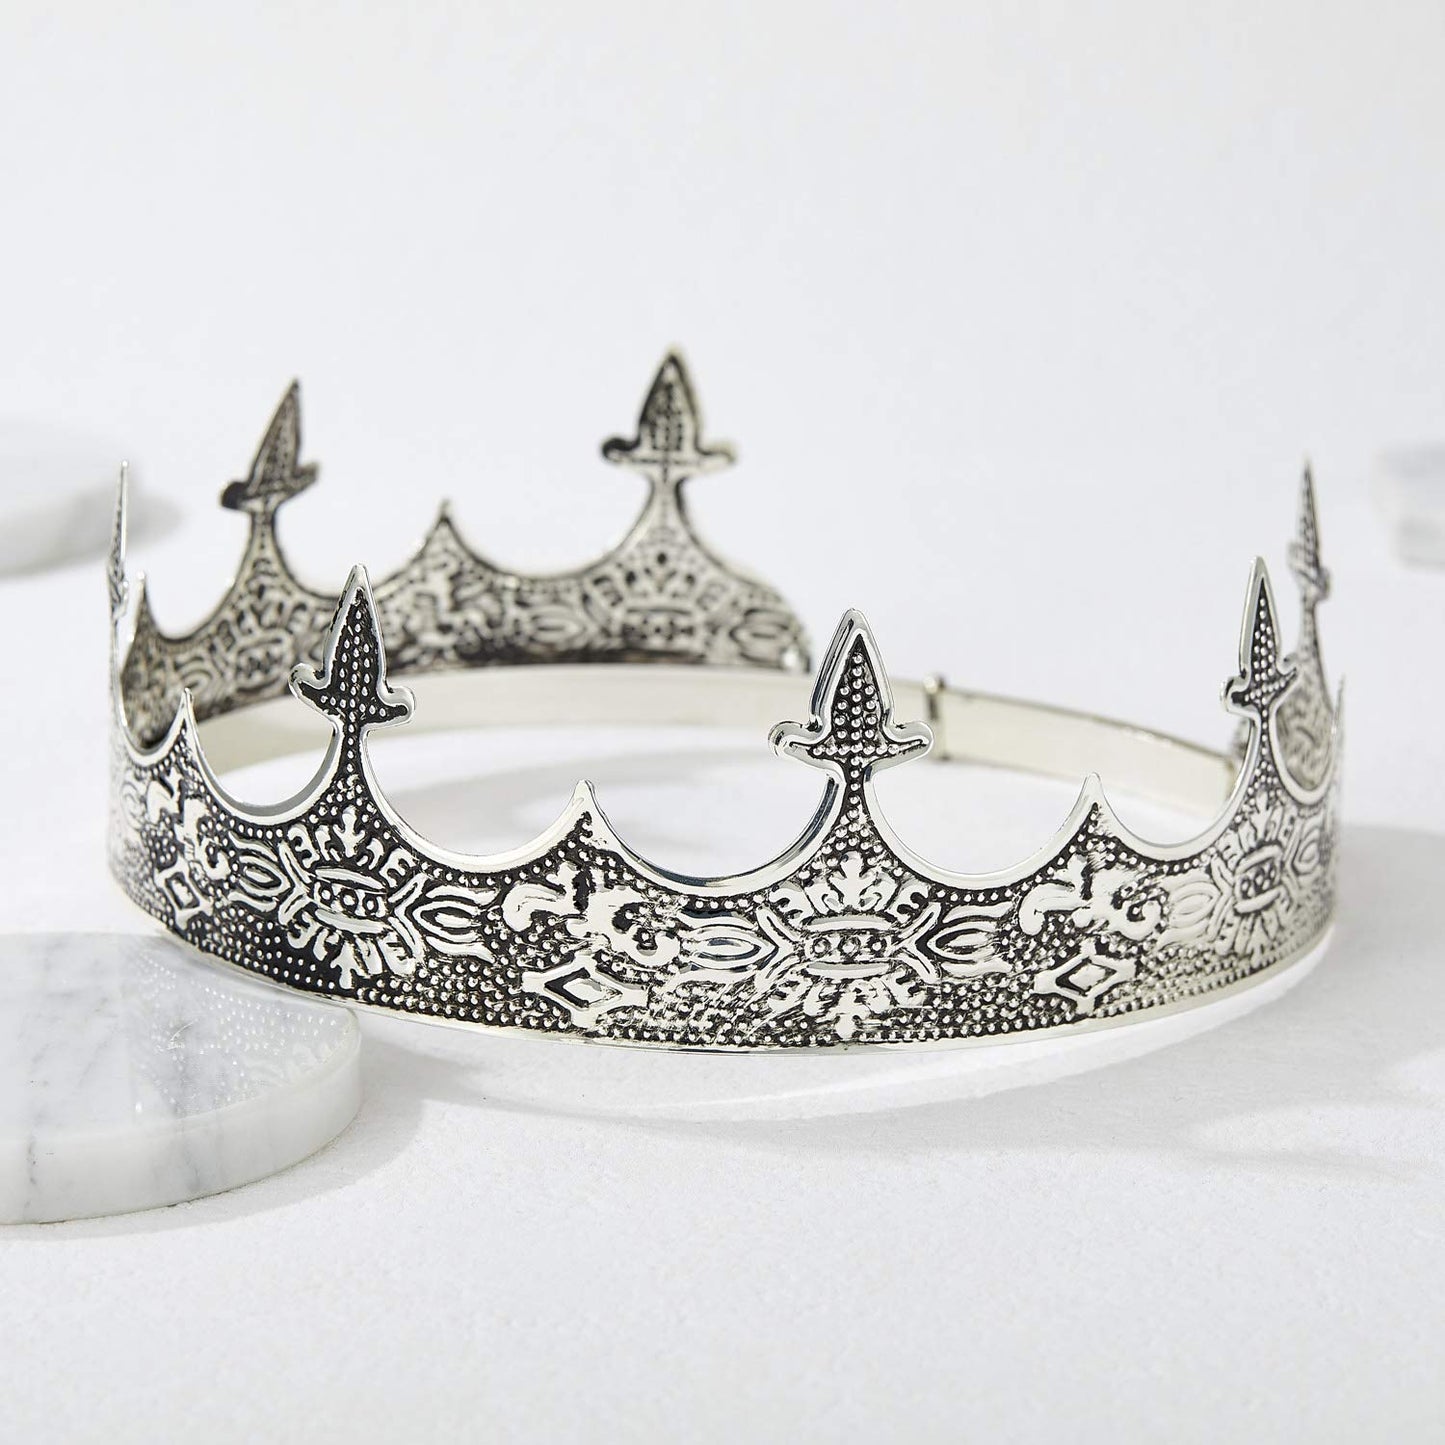 SWEETV King Crown for Men - Royal Men's Crown Prince Tiara for Wedding Birthday Prom Party Halloween Decorations, Alexander Antique Silver